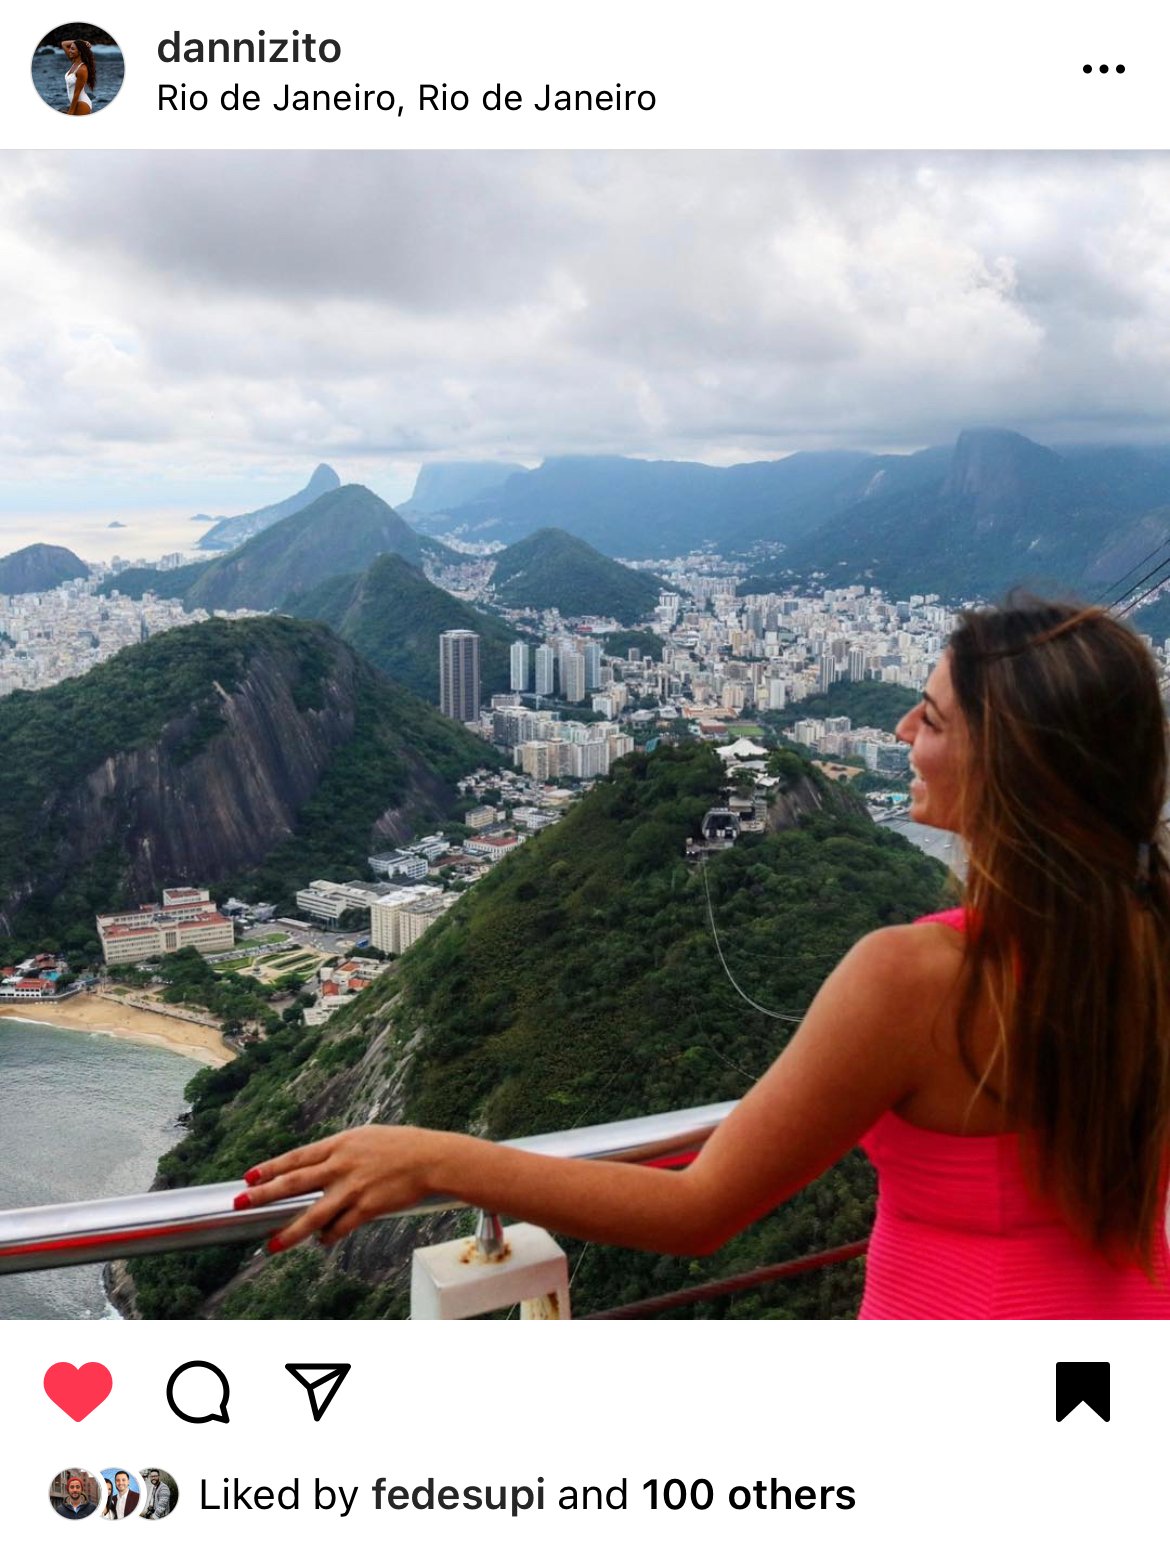 Sugarloaf mountain, Instagrammable places in Rio de Janeiro